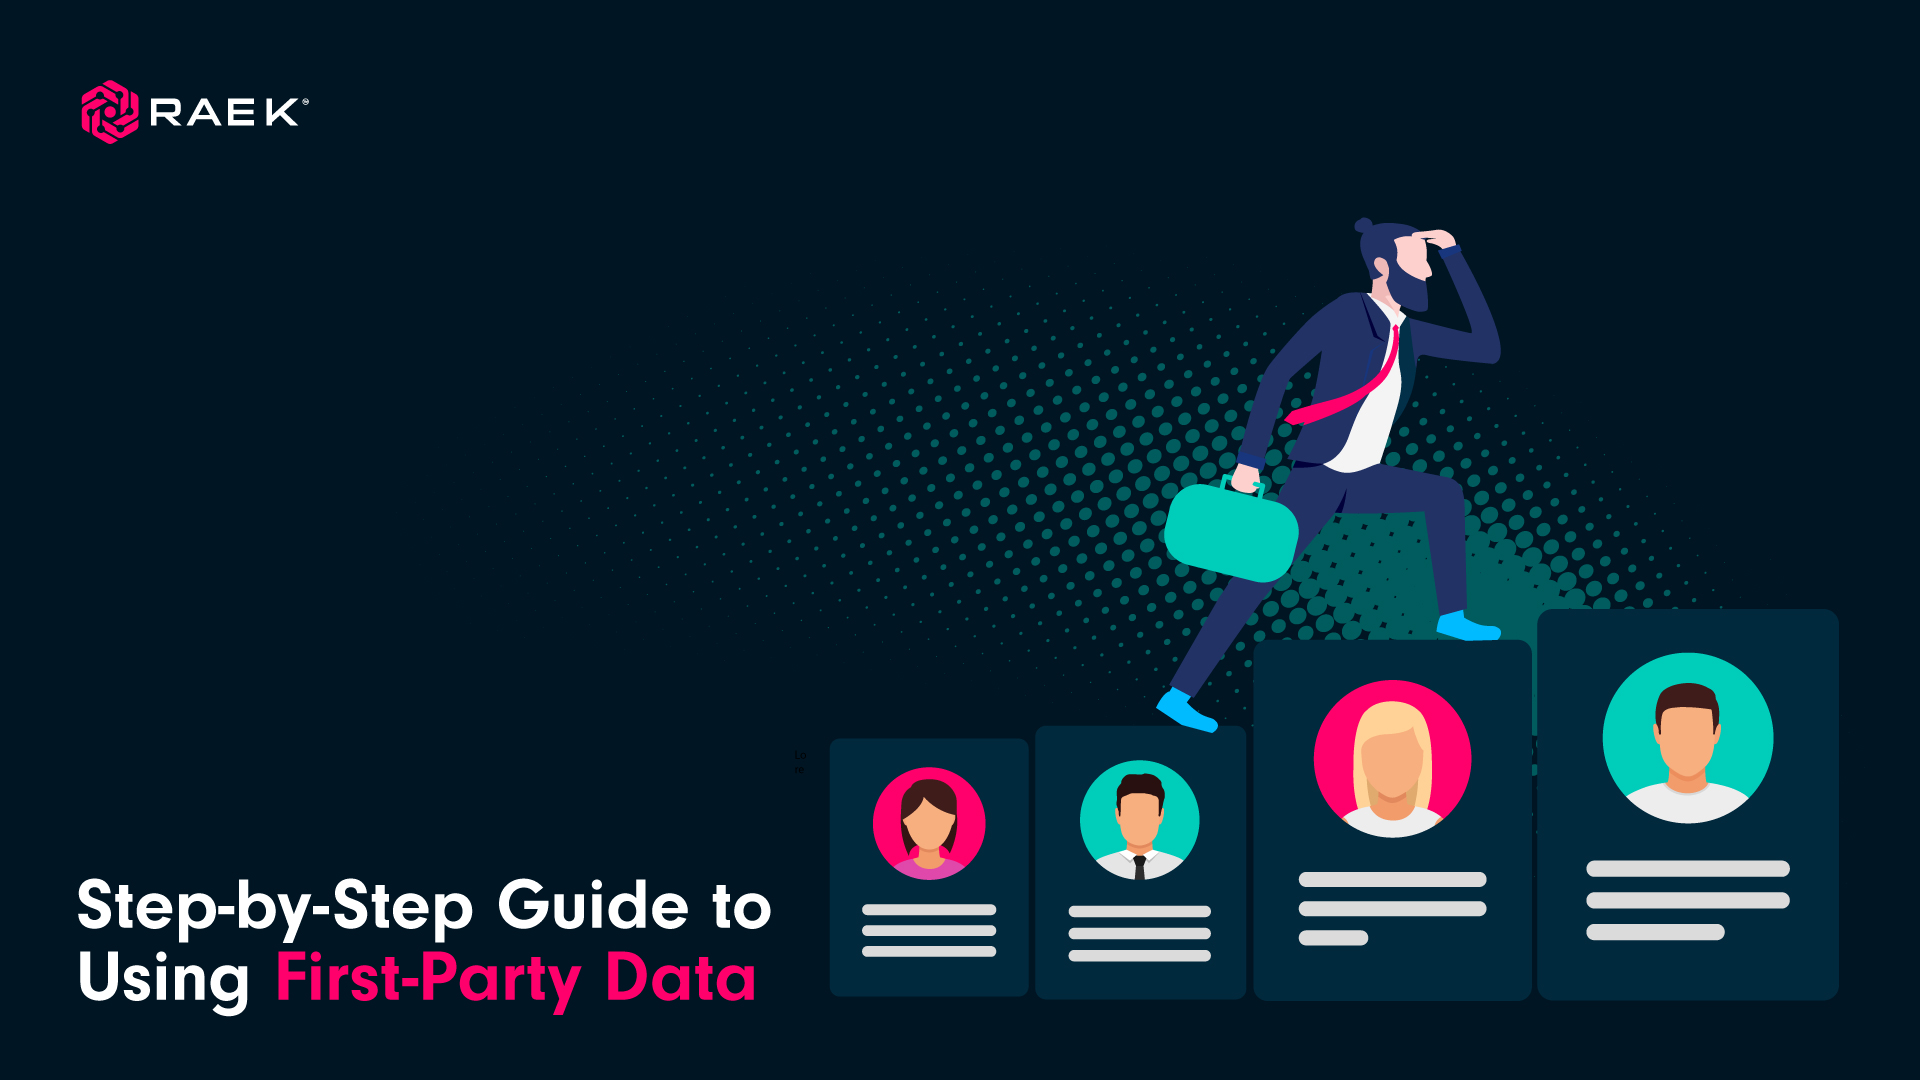 Step-by-Step Guide to Using First-Party Data